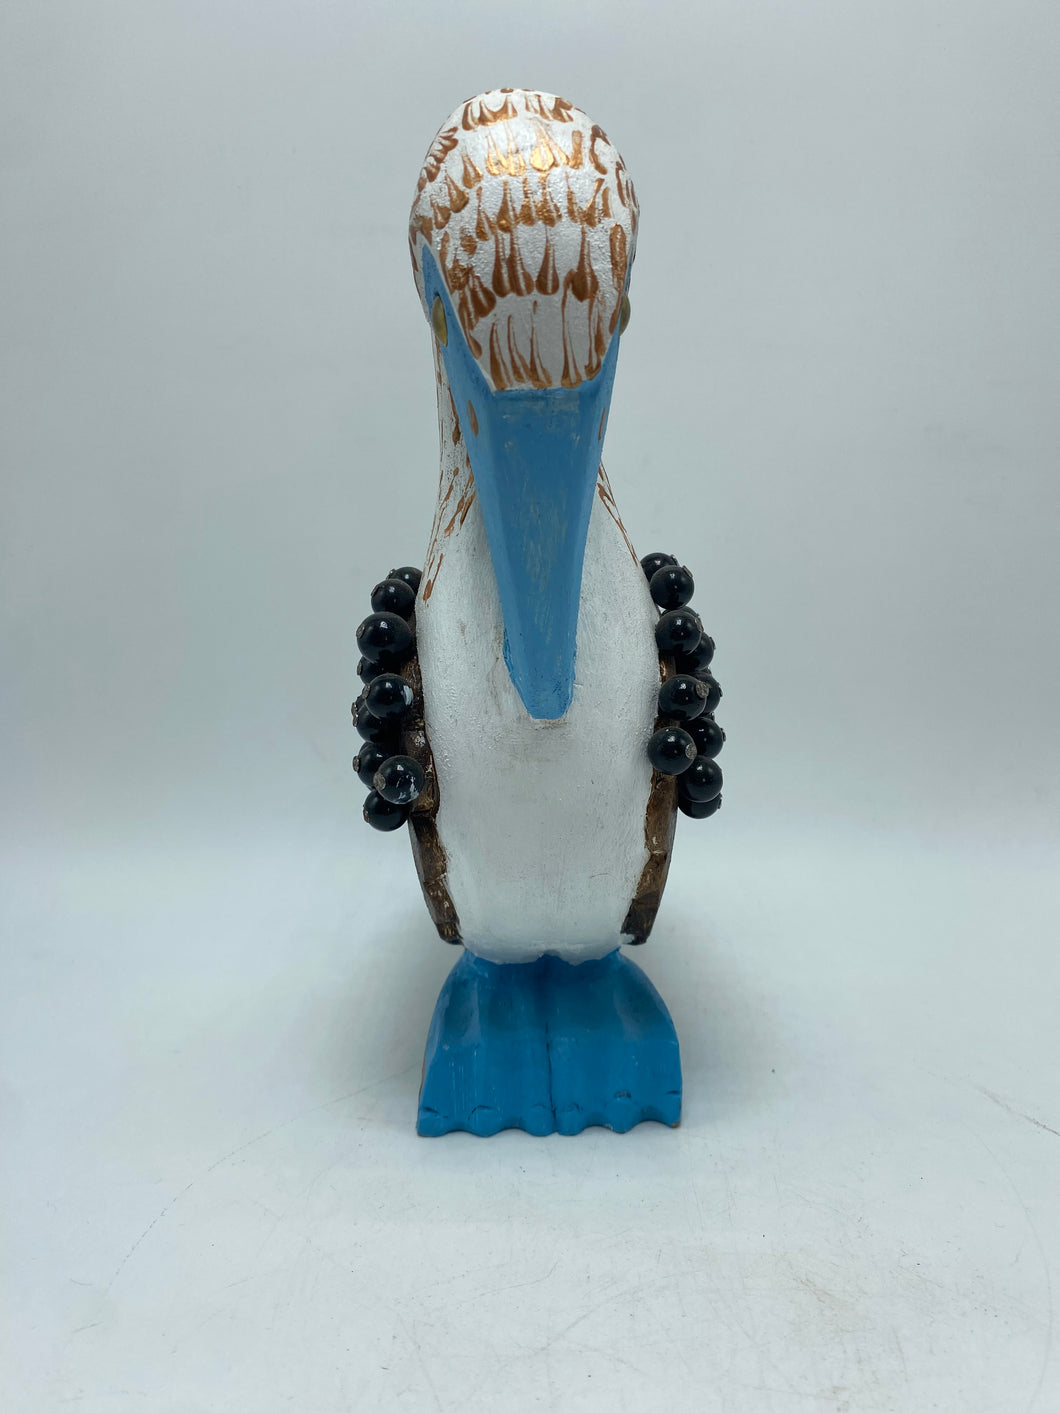 WOODEN BLUE FOOTED BOOBY N21